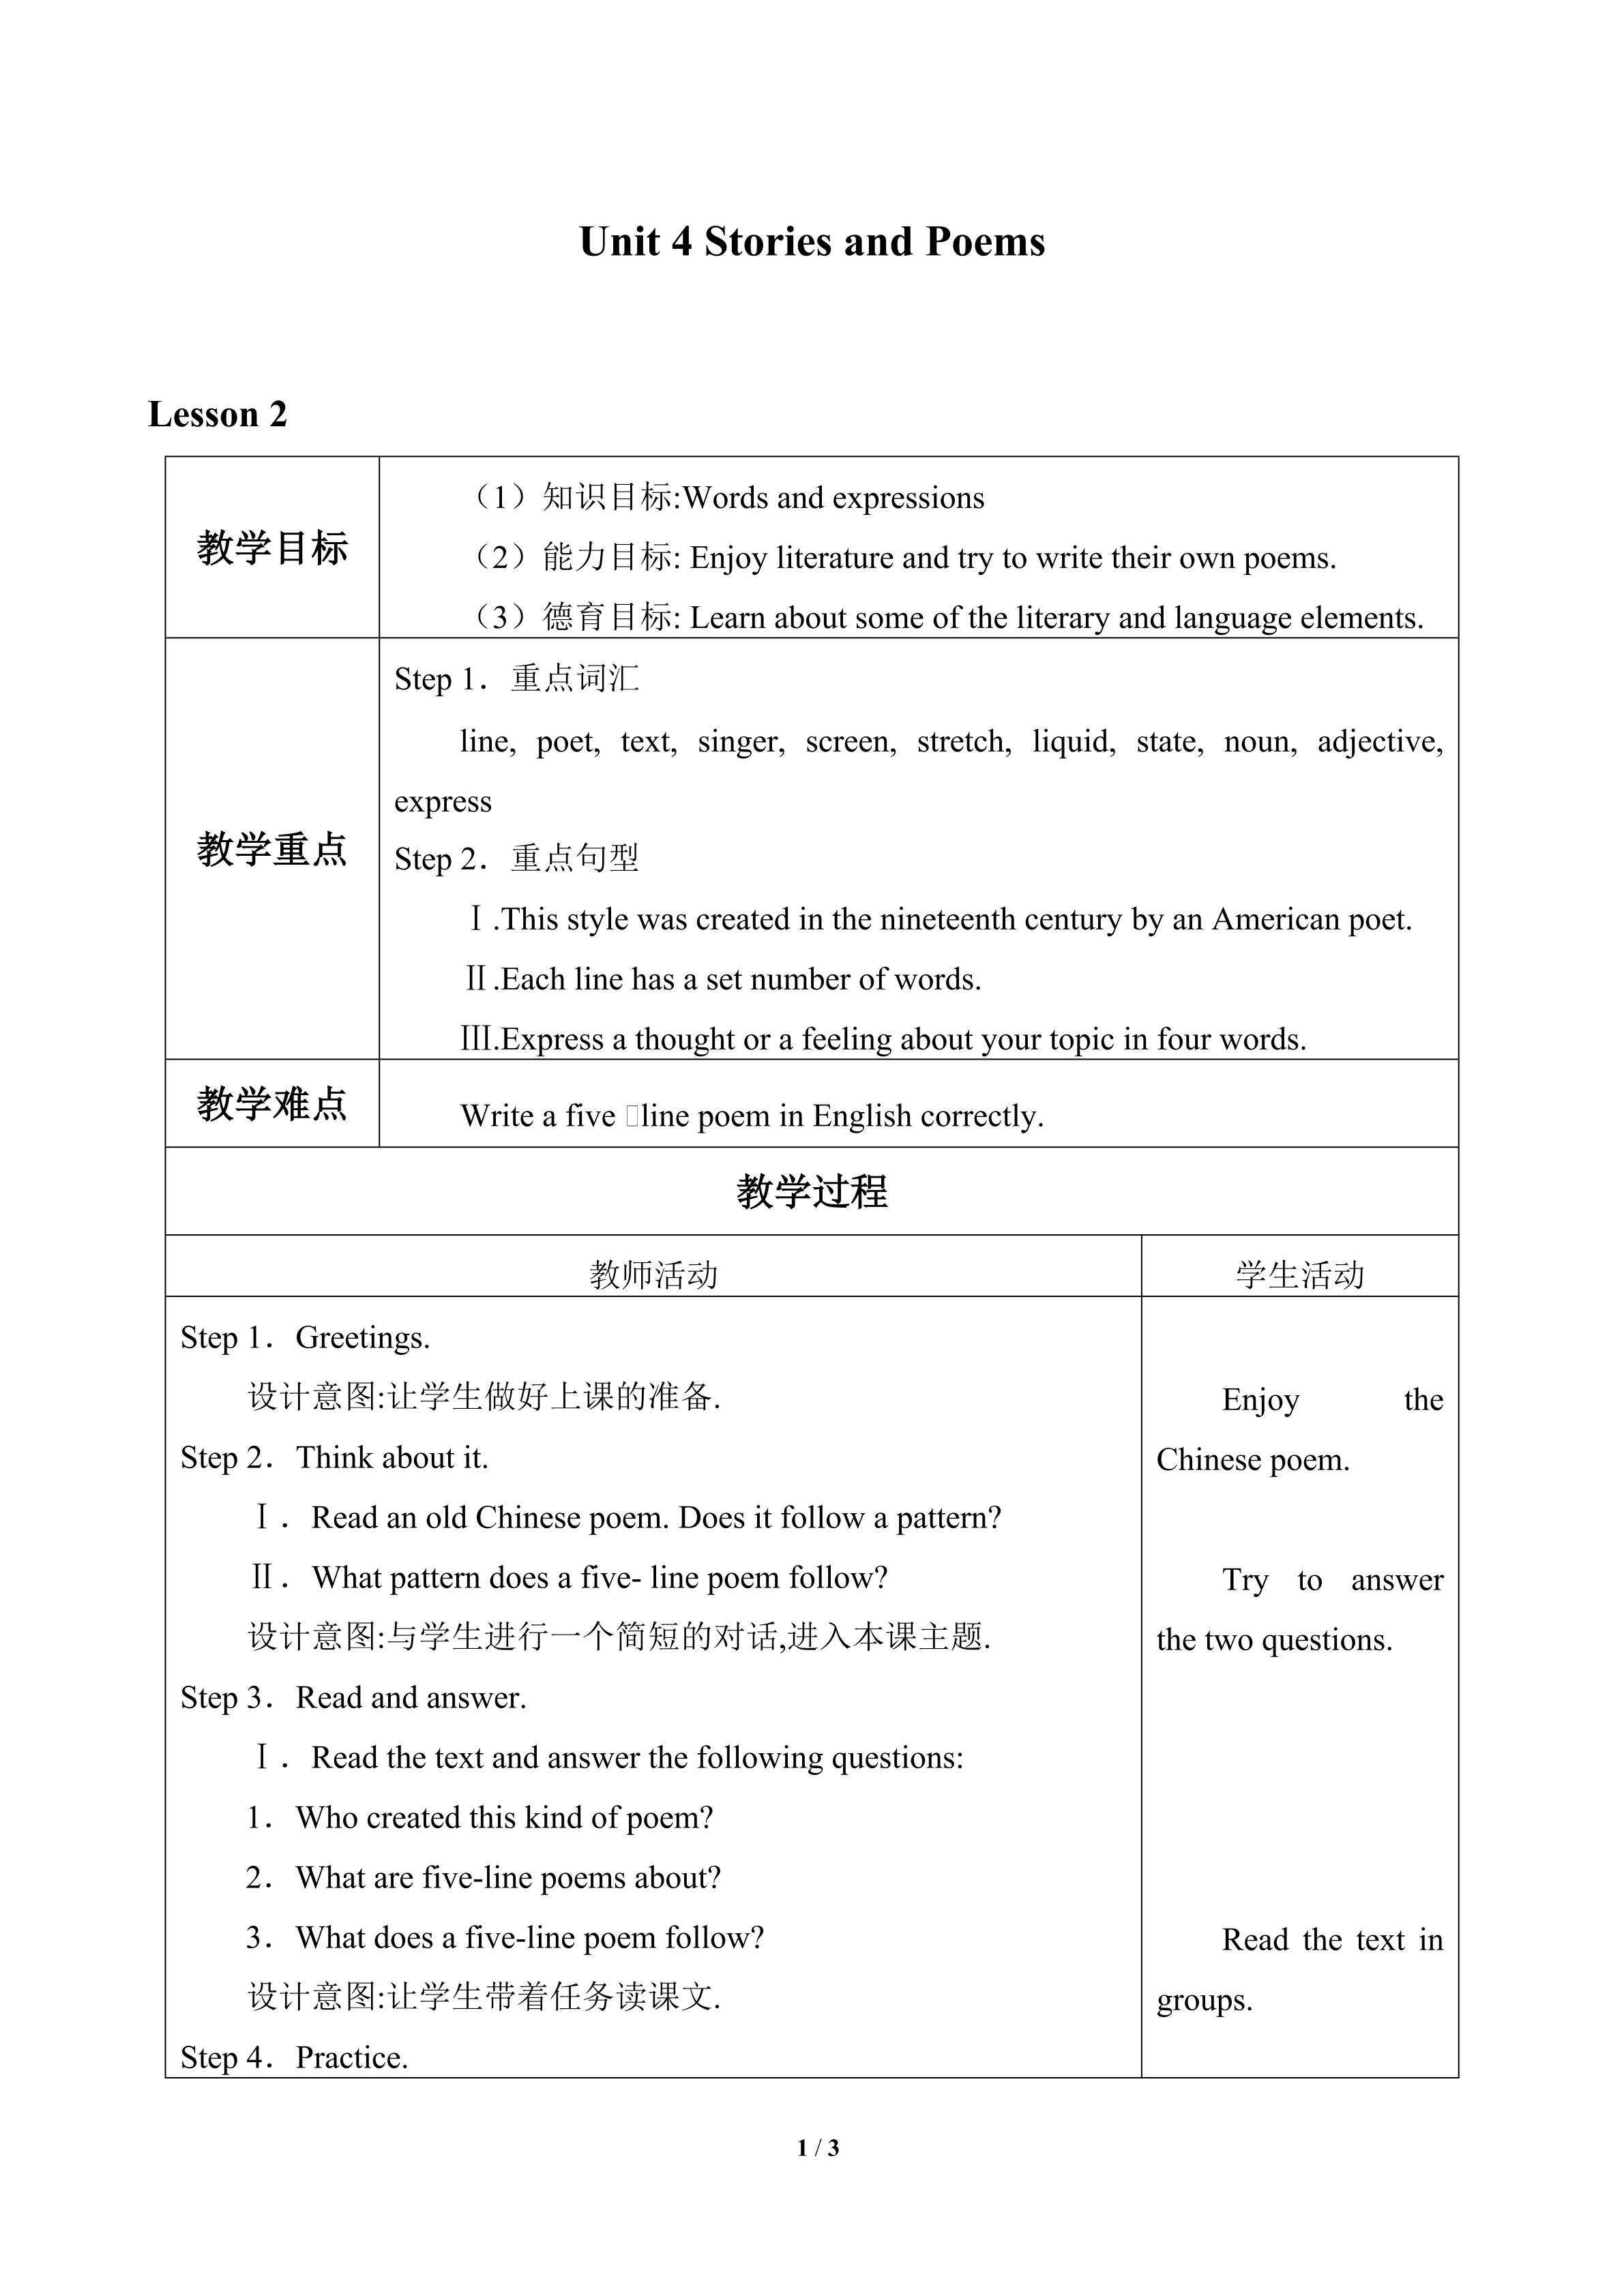 Unit 4 Stories and Poems_教案2